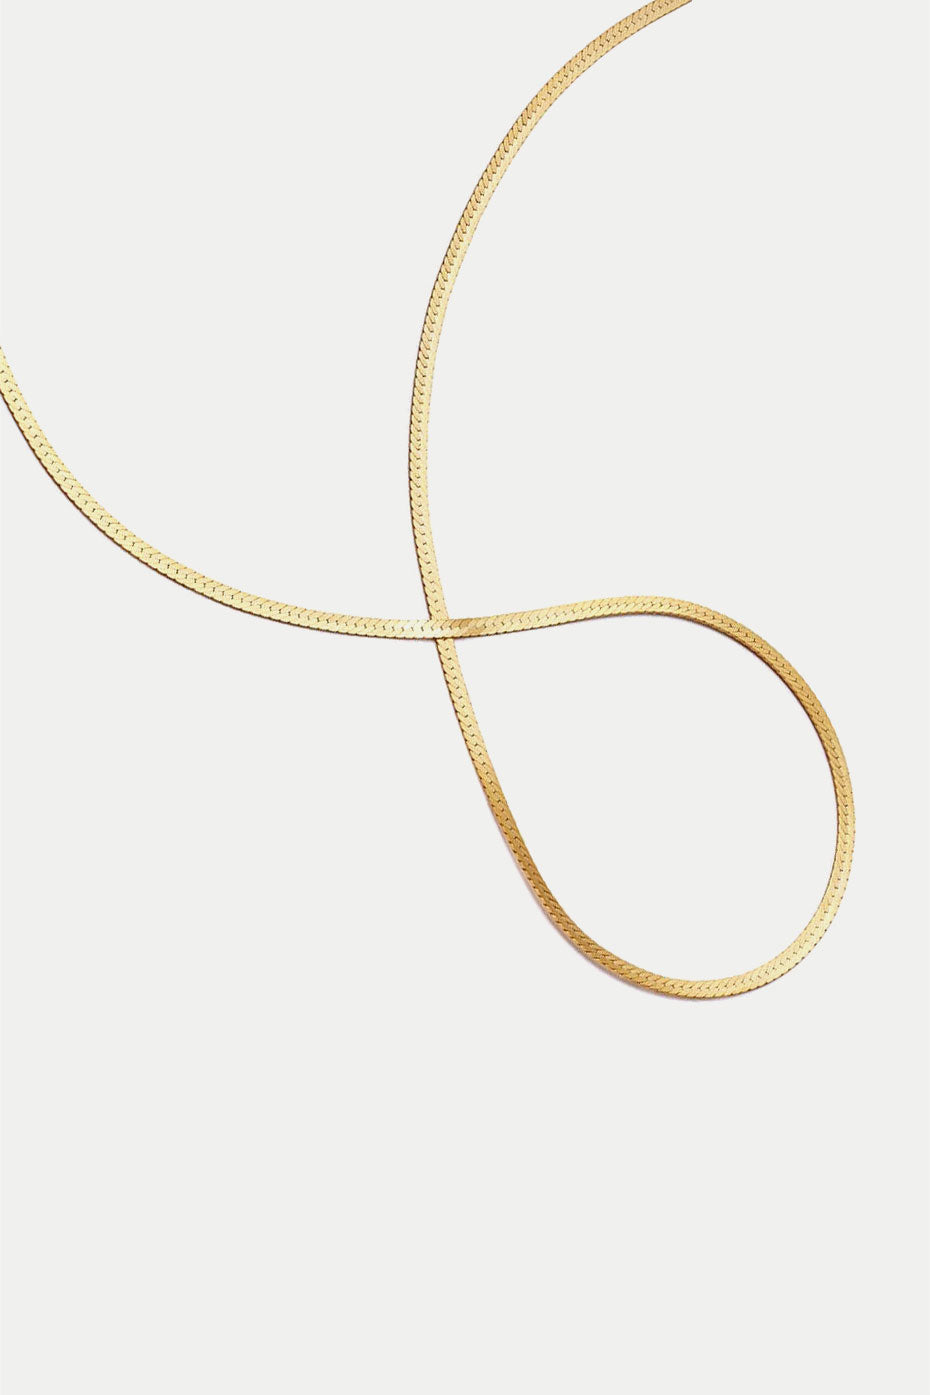 daisy-london-gold-plated-fine-snake-chain-necklace